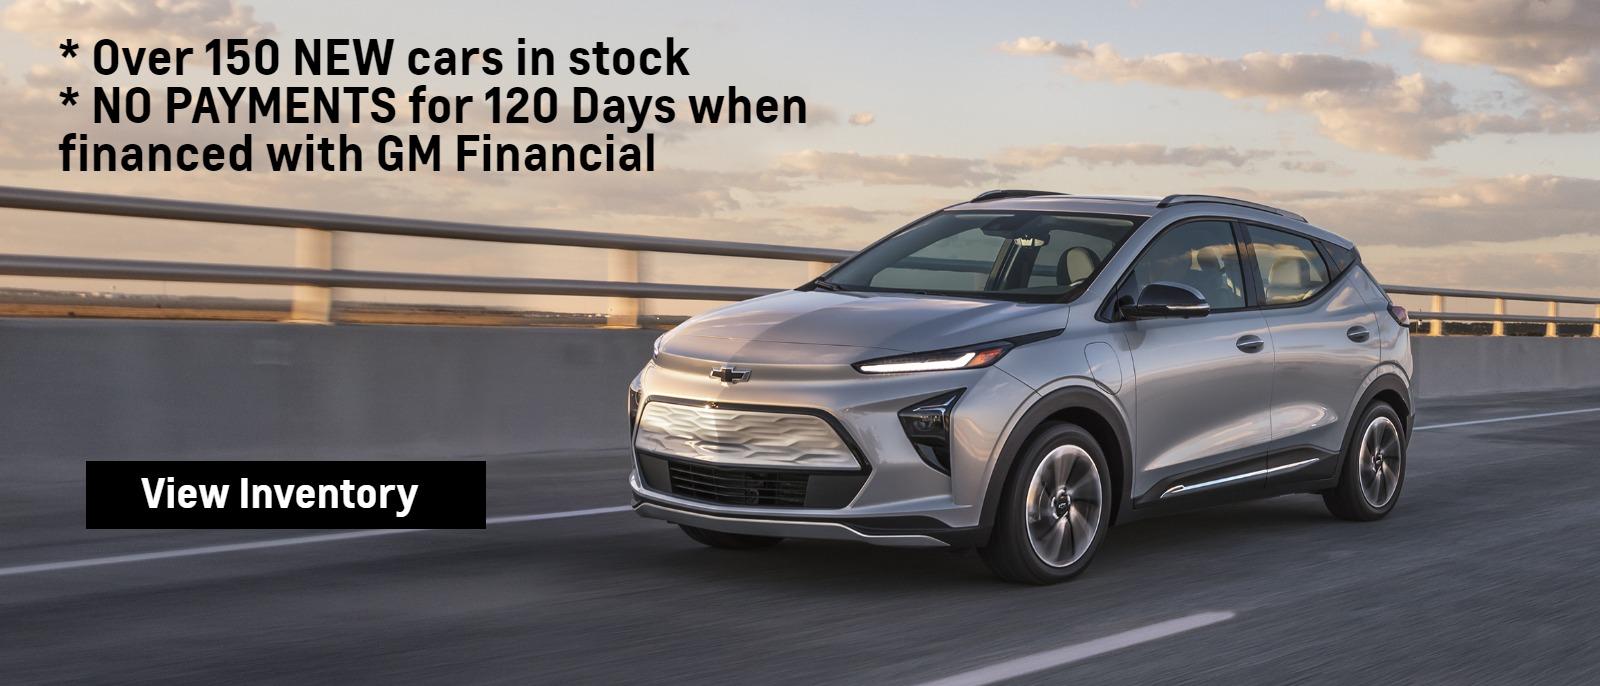 * Over 150 NEW cars in stock
* NO PAYMENTS for 120 Days when financed with GM Financial